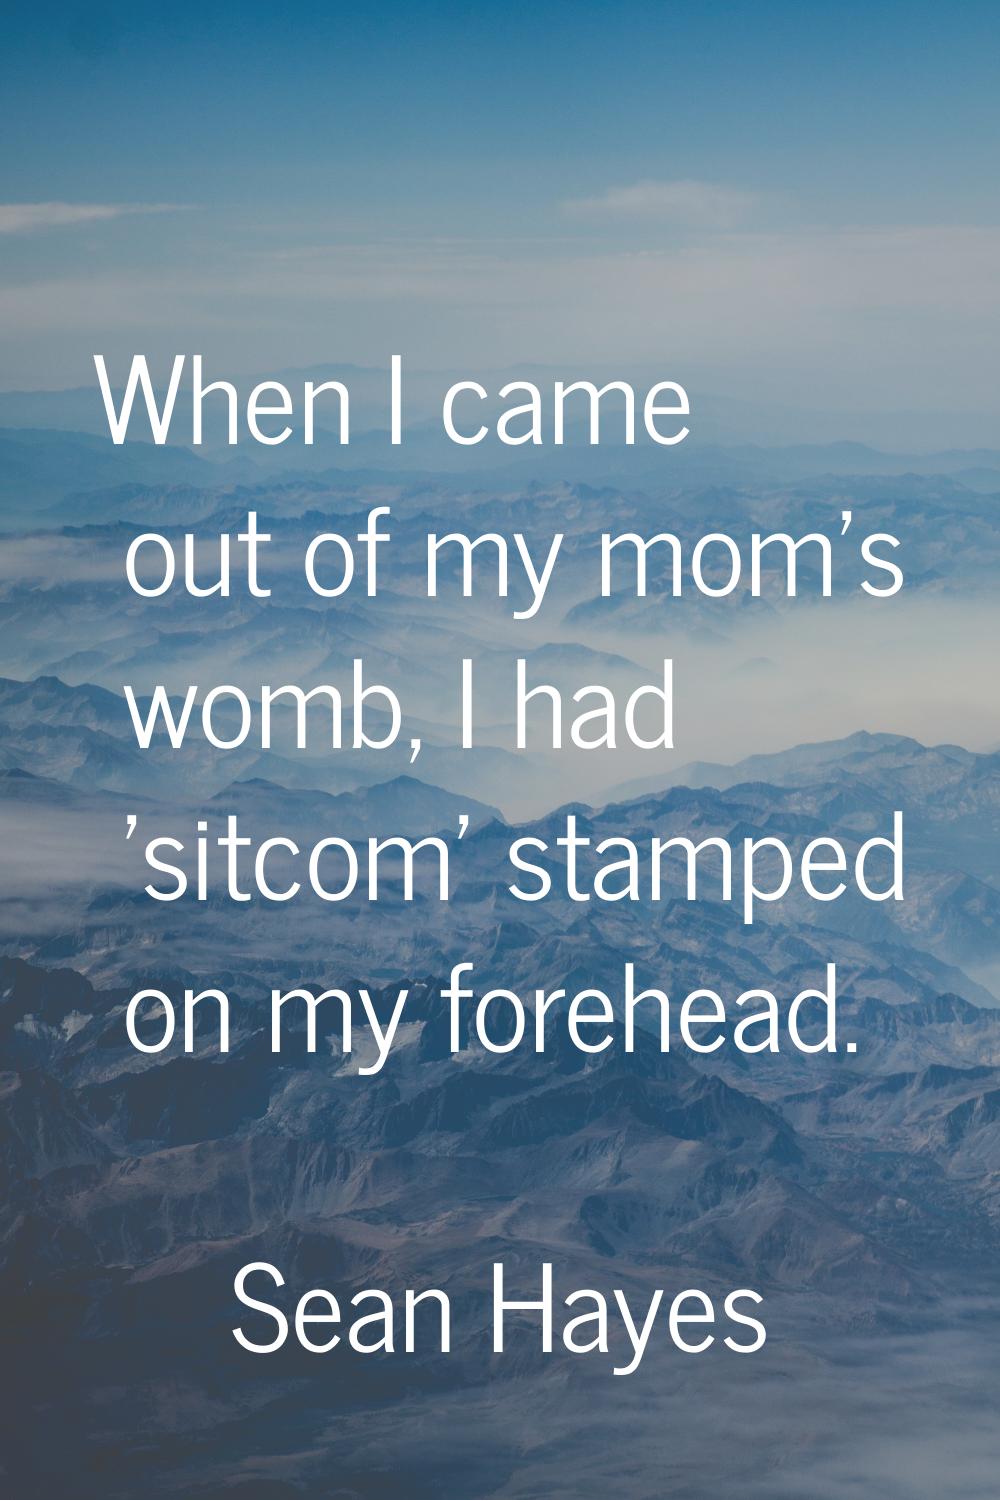 When I came out of my mom's womb, I had 'sitcom' stamped on my forehead.